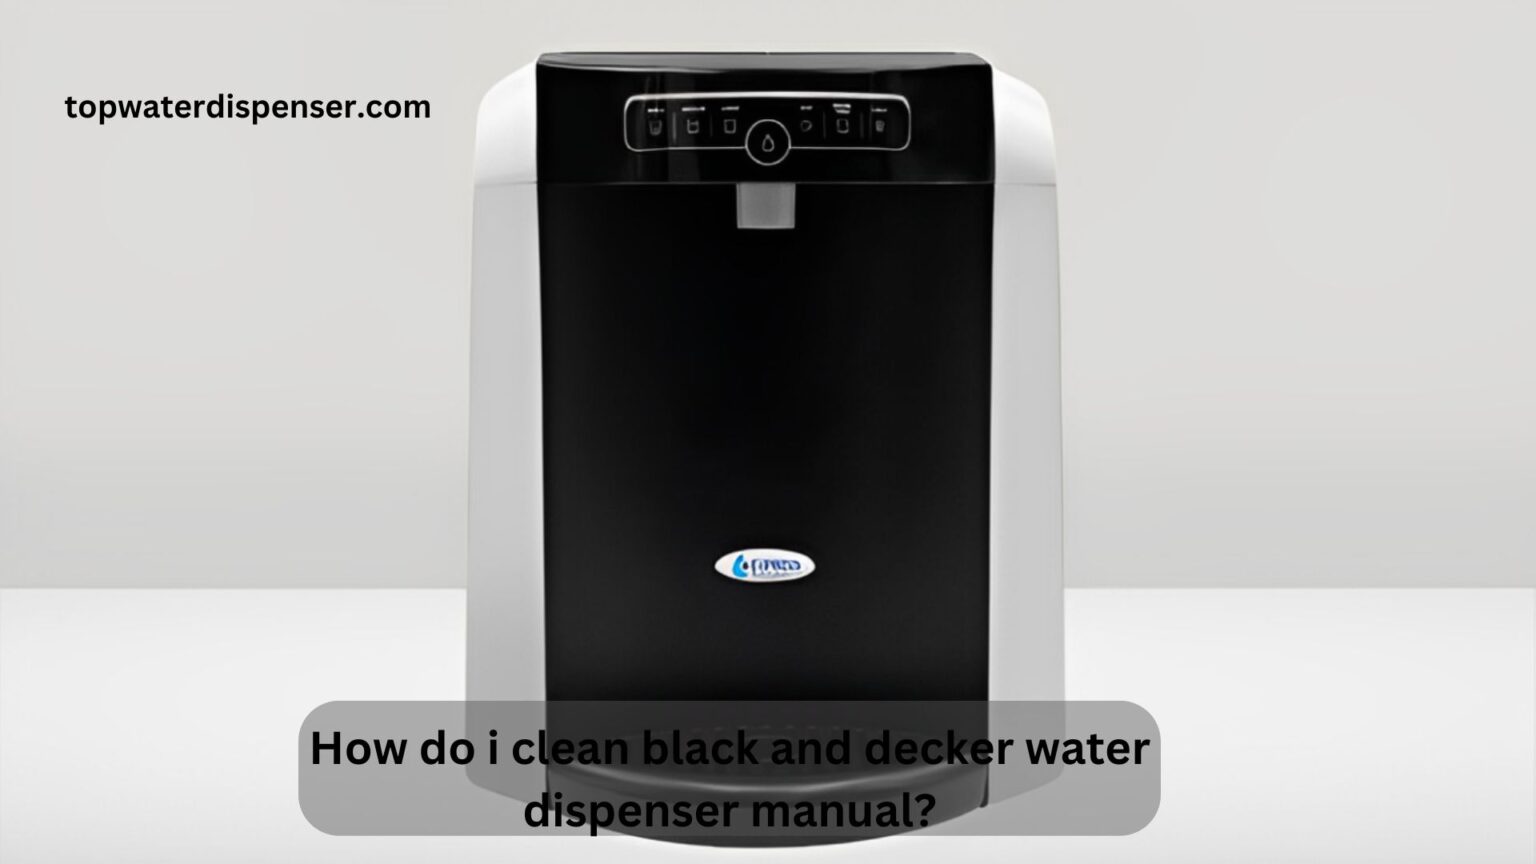 How do I clean black and decker water dispenser manual?